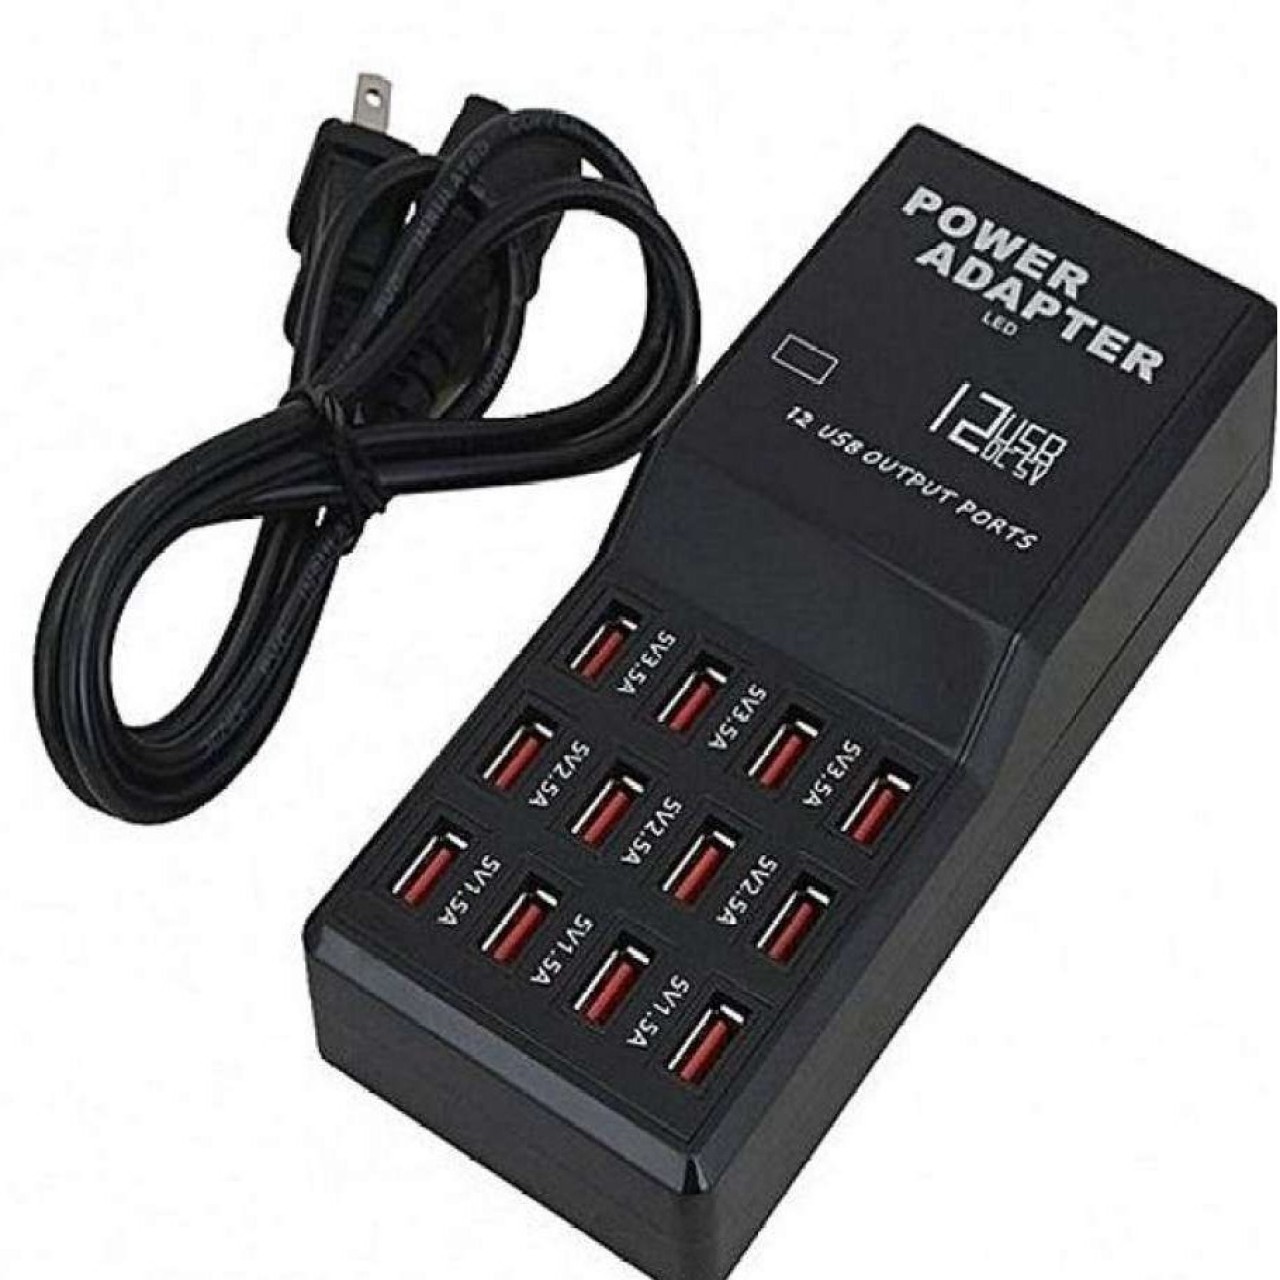 Fast Usb Charger 12 Port 12Amp W858